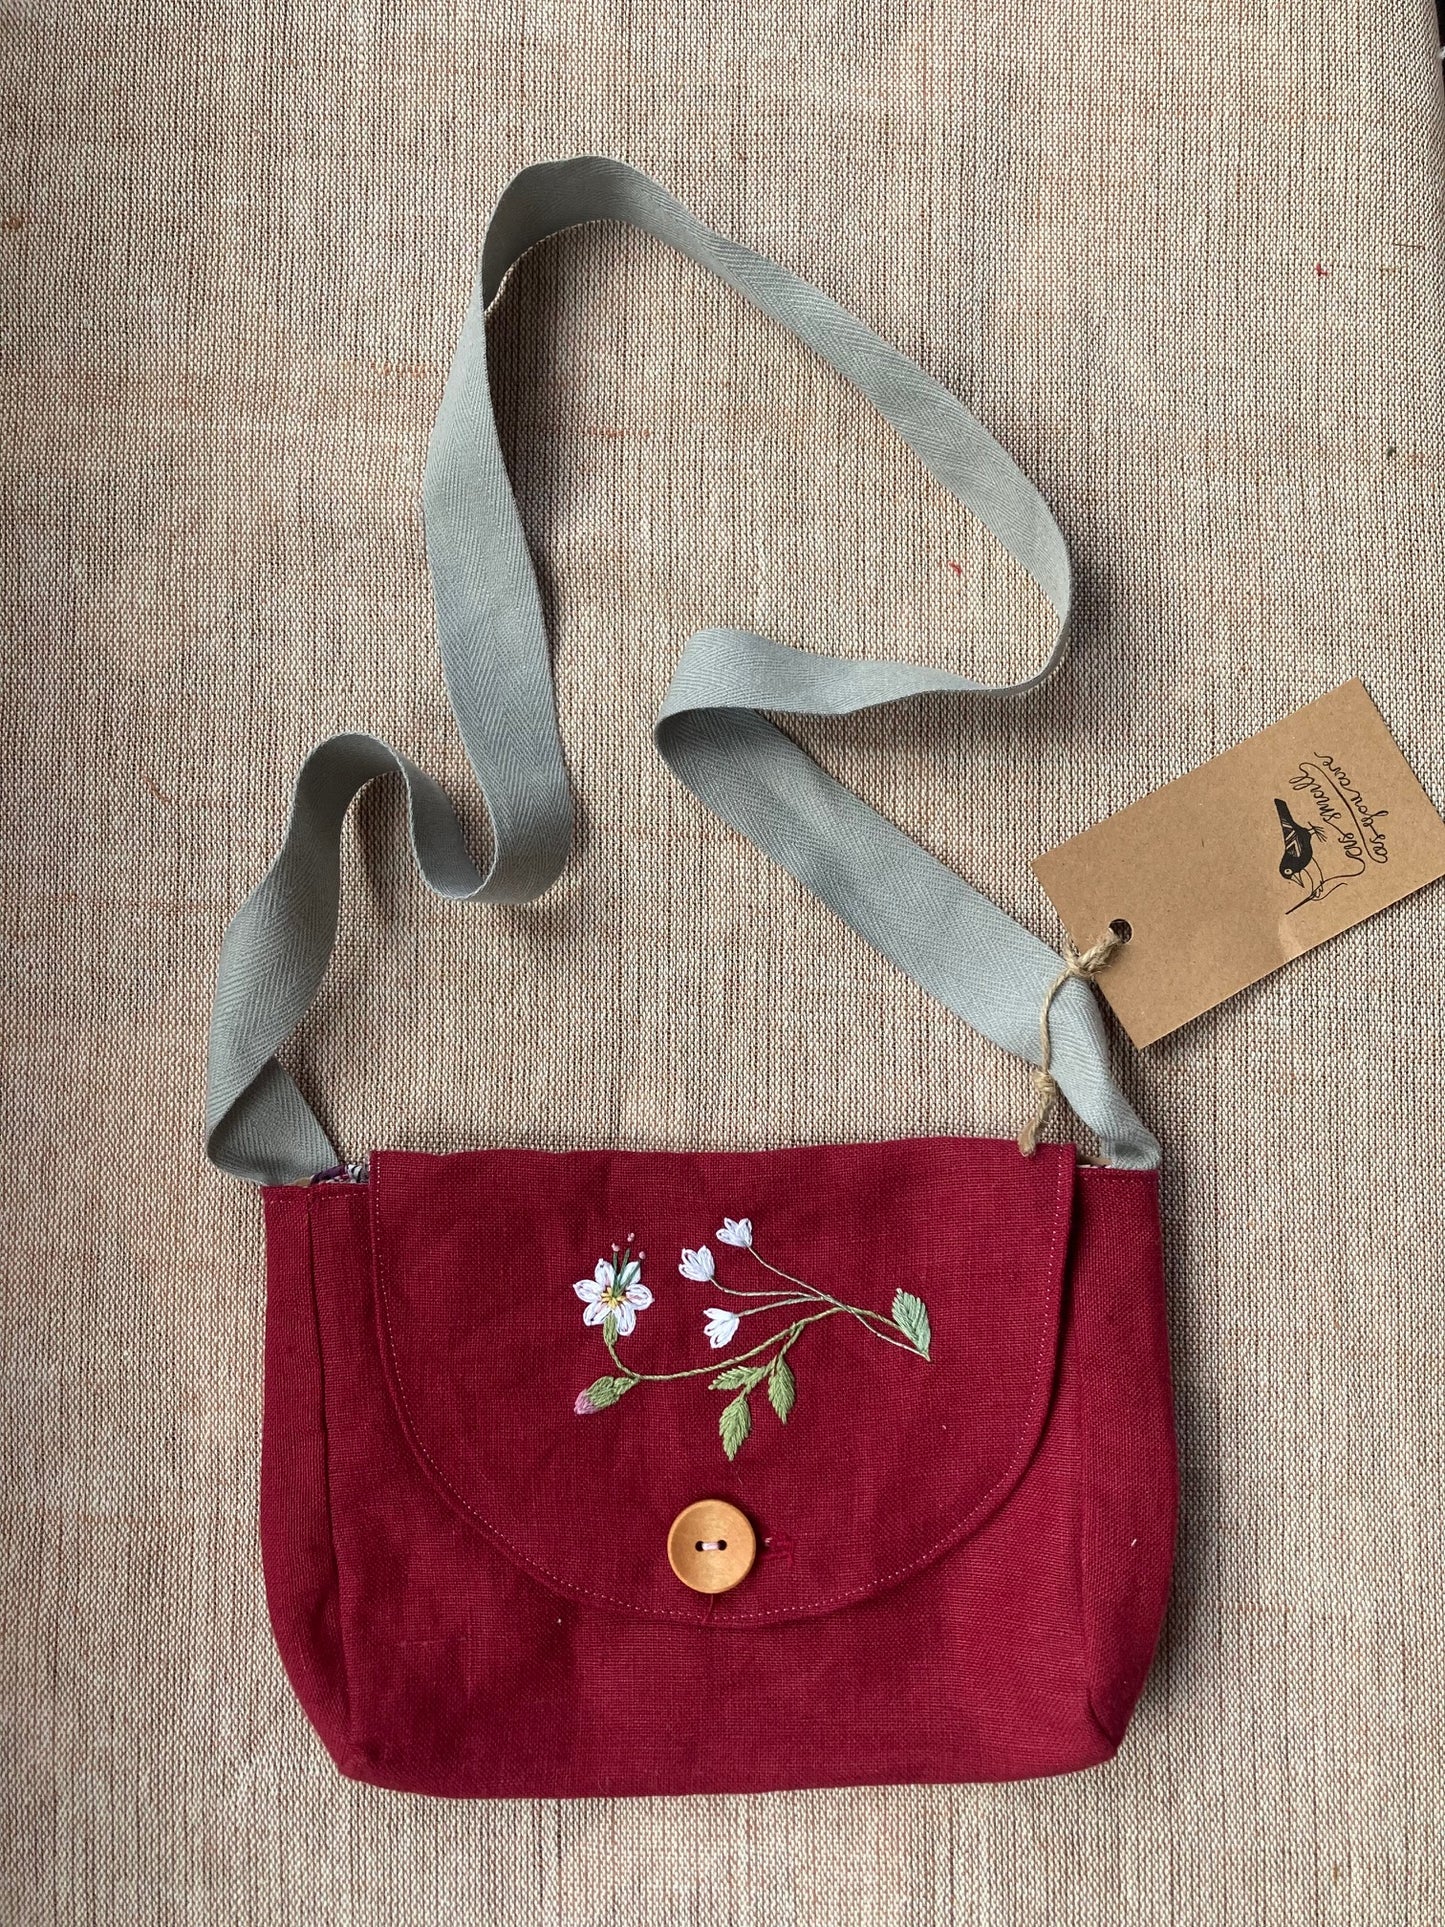 Red Satchel with Hand Embroidered White flowers